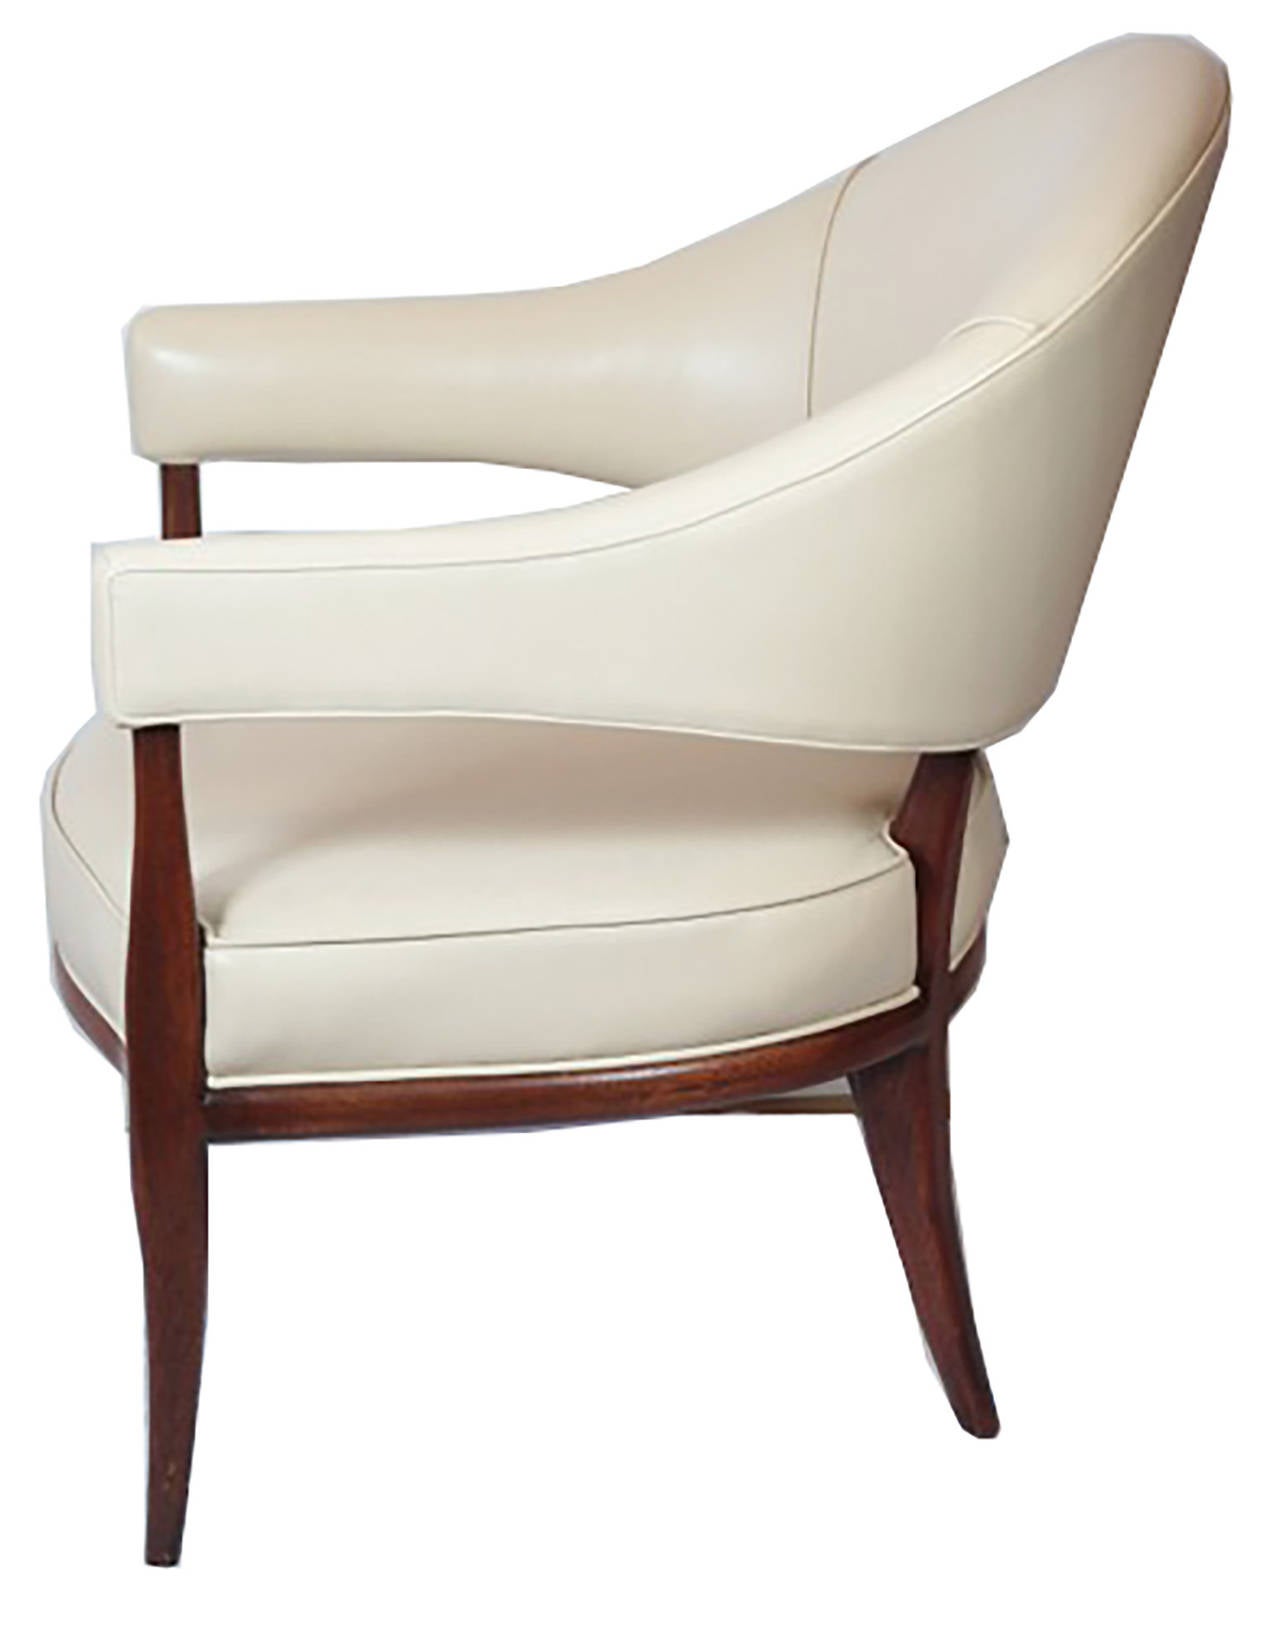 Morrow Occasional Chair by Michael Berman Limited
Barrel back arm chair with rounded, shaped legs extending from the bottom of the arms and back to the floor. Tight seat cushion is framed with exposed wood base. Shown in cream leather